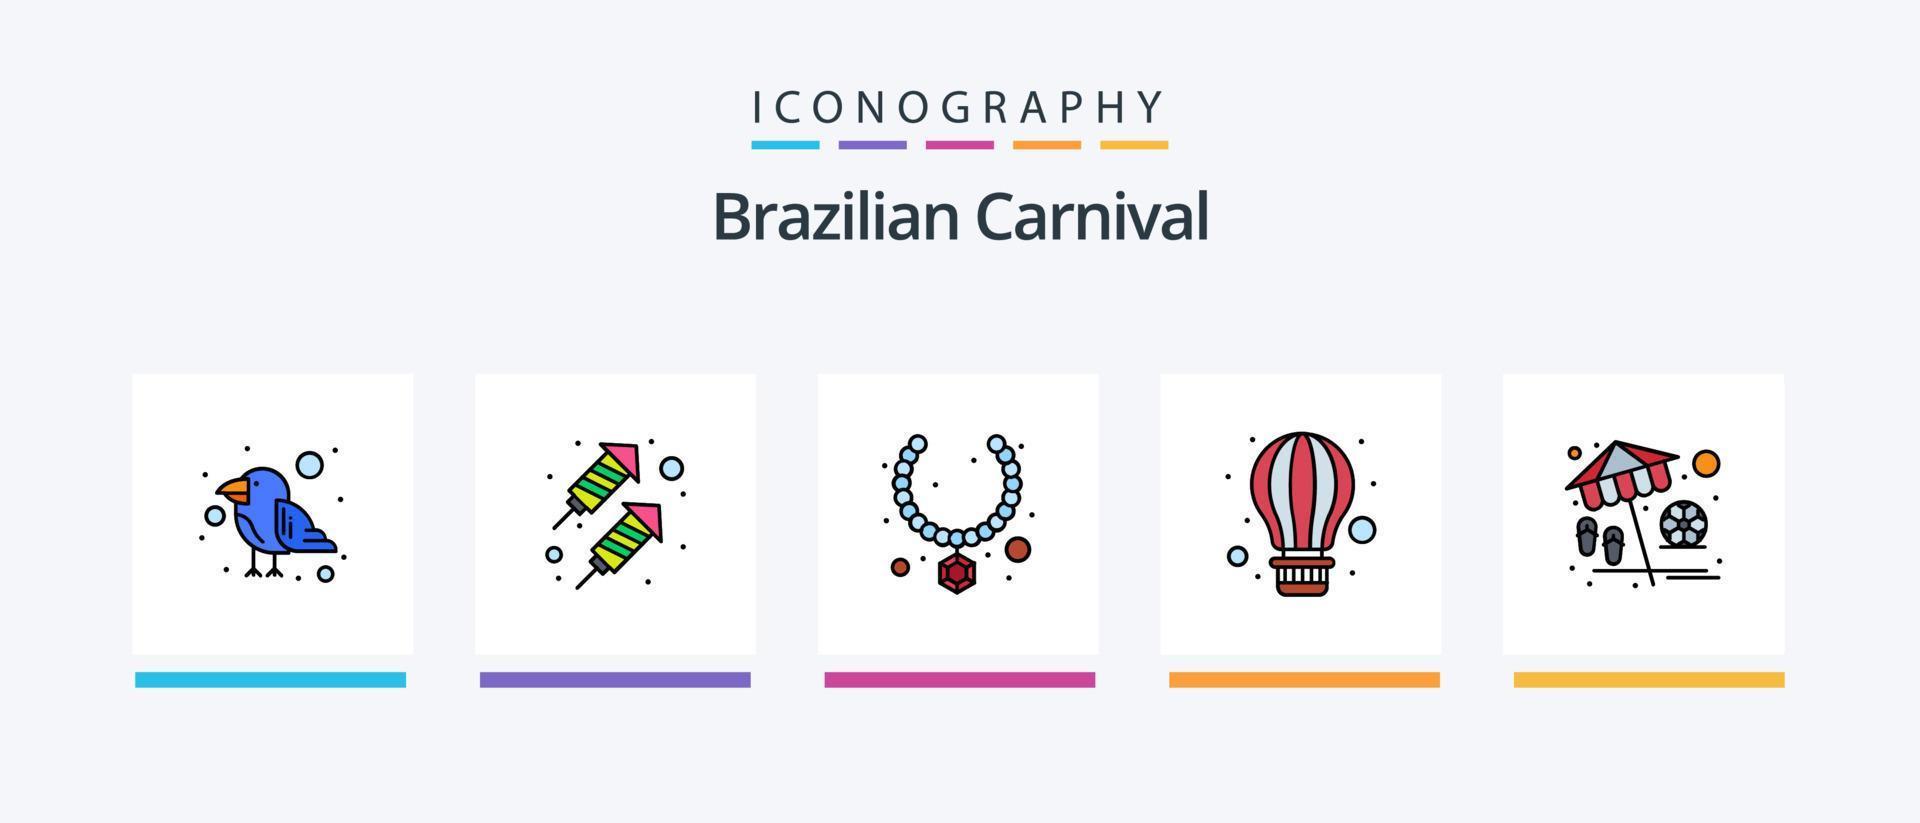 Brazilian Carnival Line Filled 5 Icon Pack Including hot air. balloon. flower. air. trophy. Creative Icons Design vector